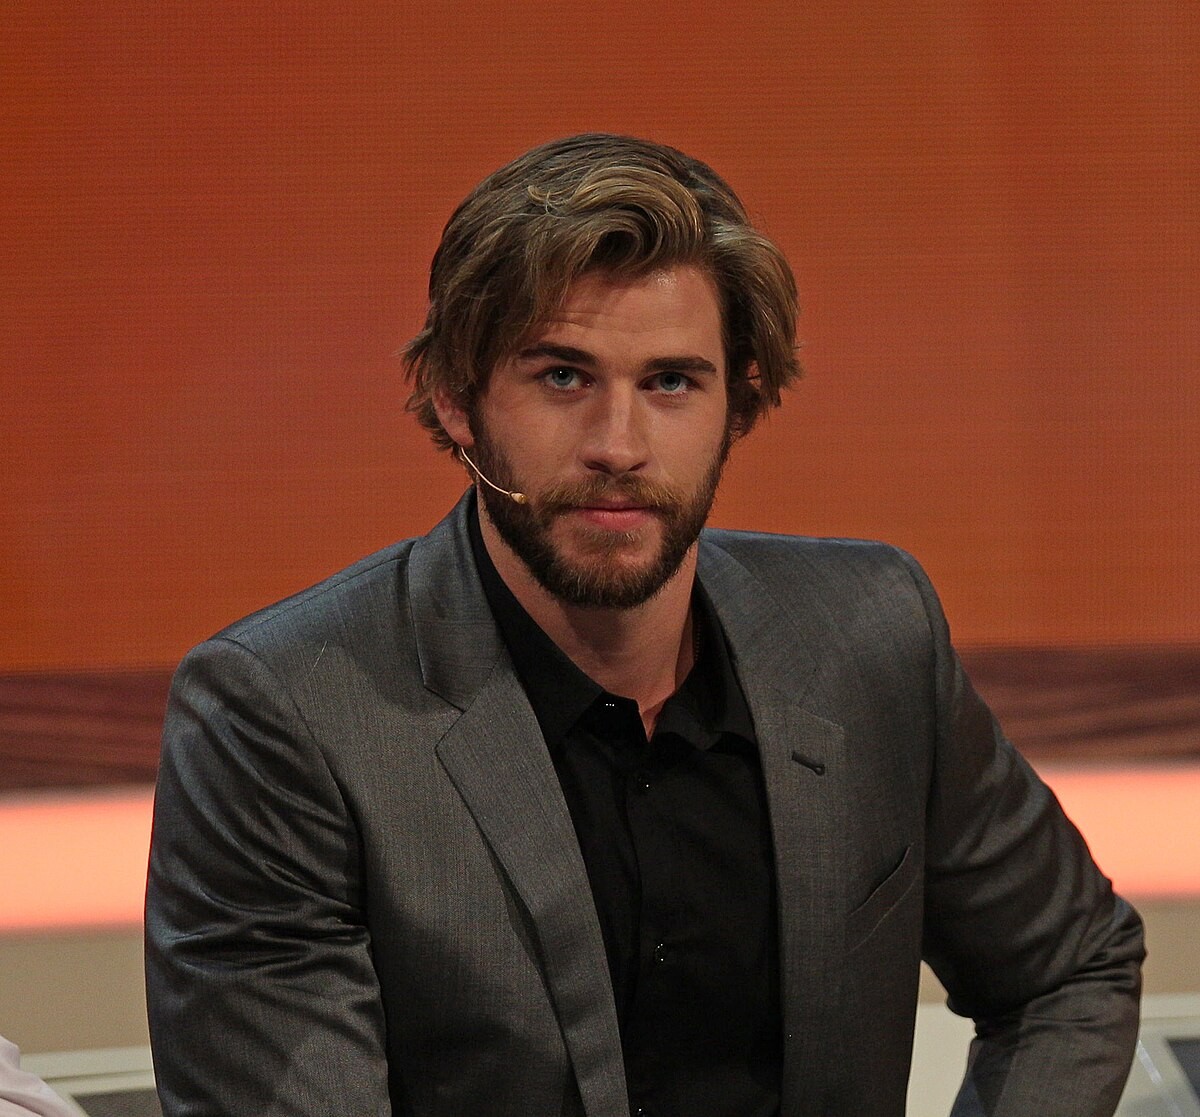 Liam Hemsworth as the Witcher.